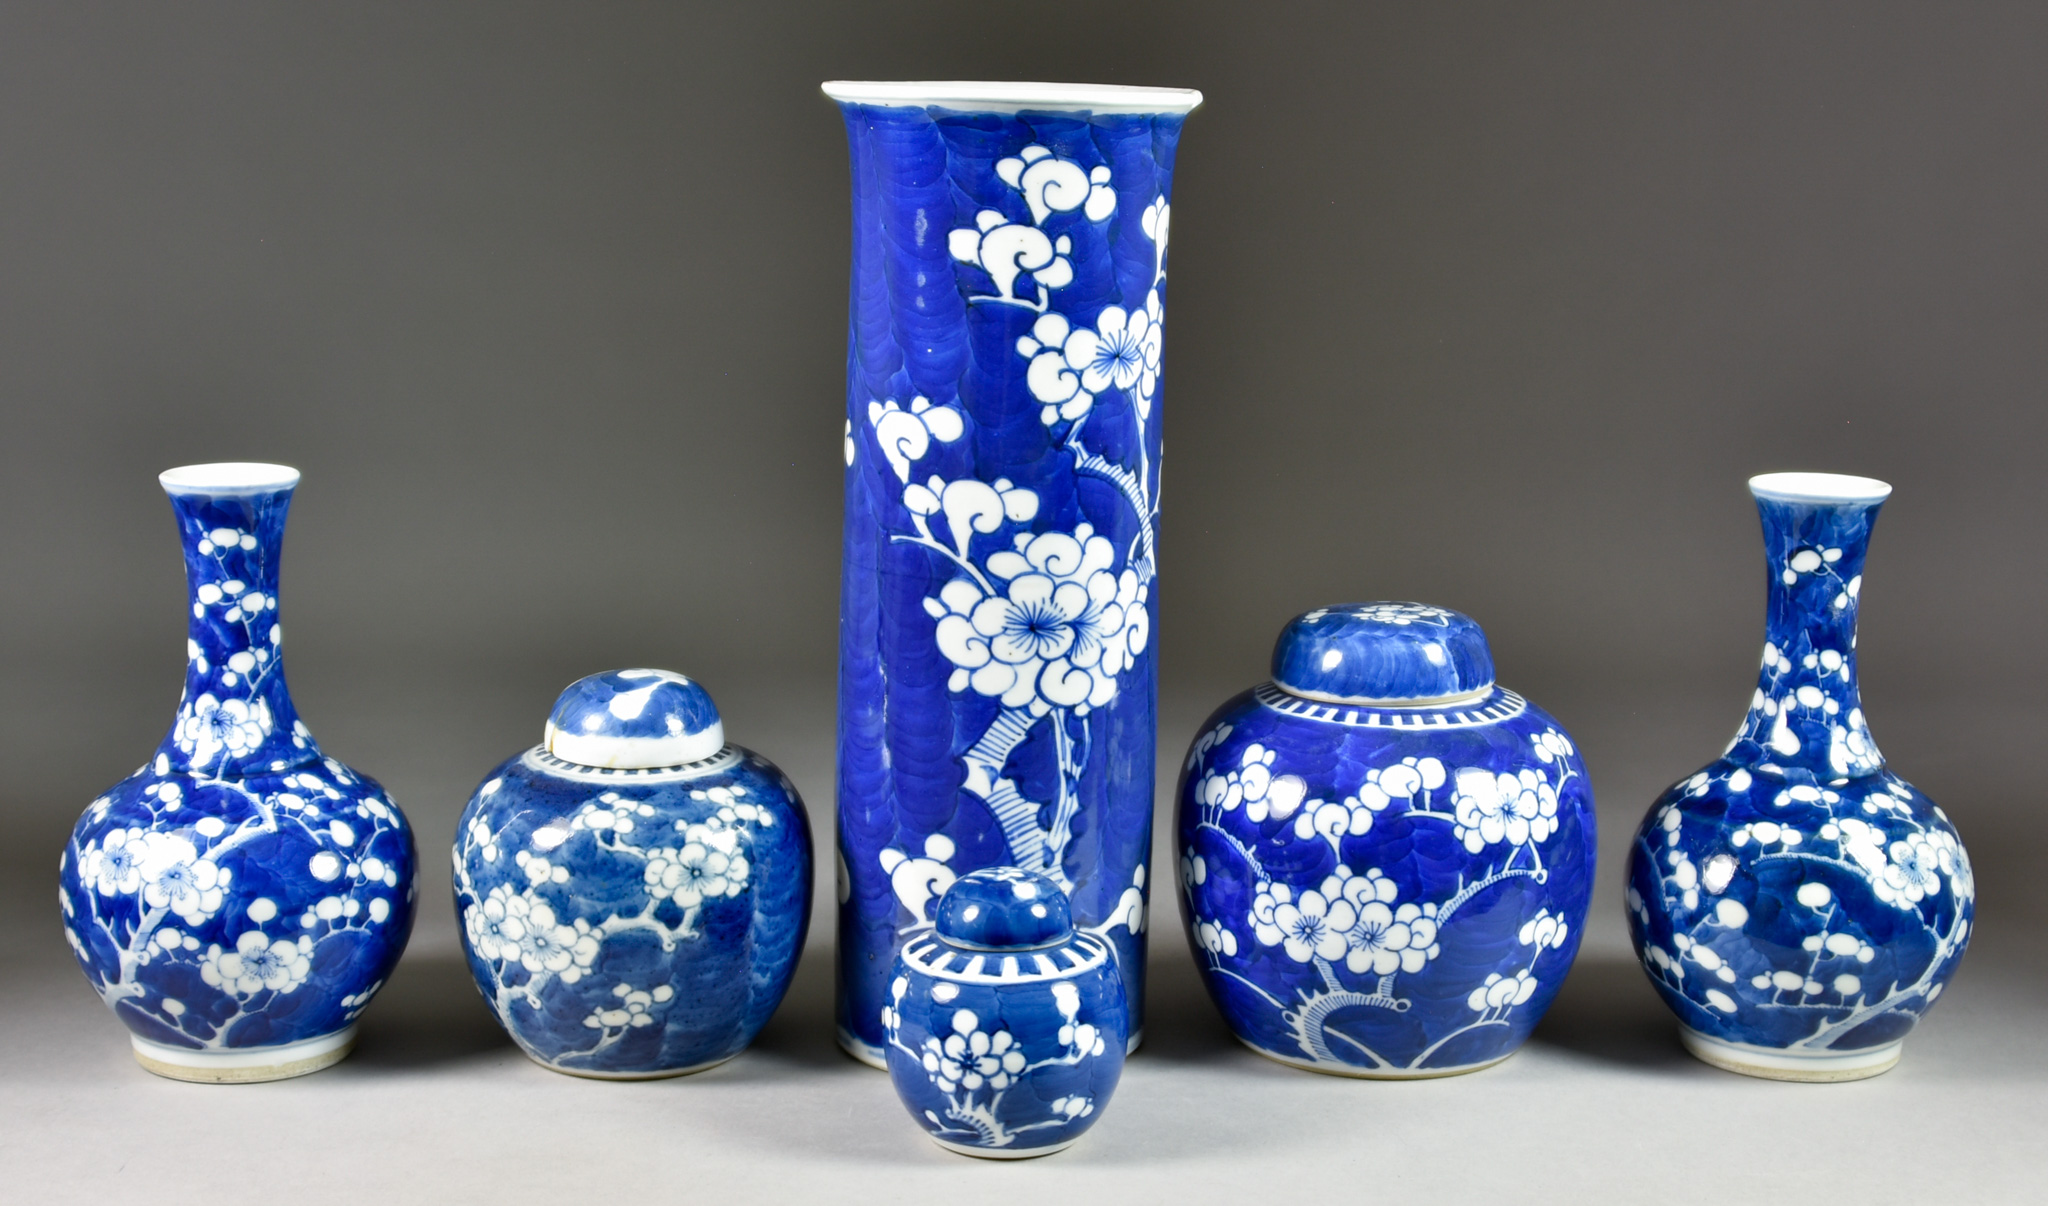 A Pair of Chinese Blue and White Porcelain Bottle Vases, 19th Century, painted with prunus